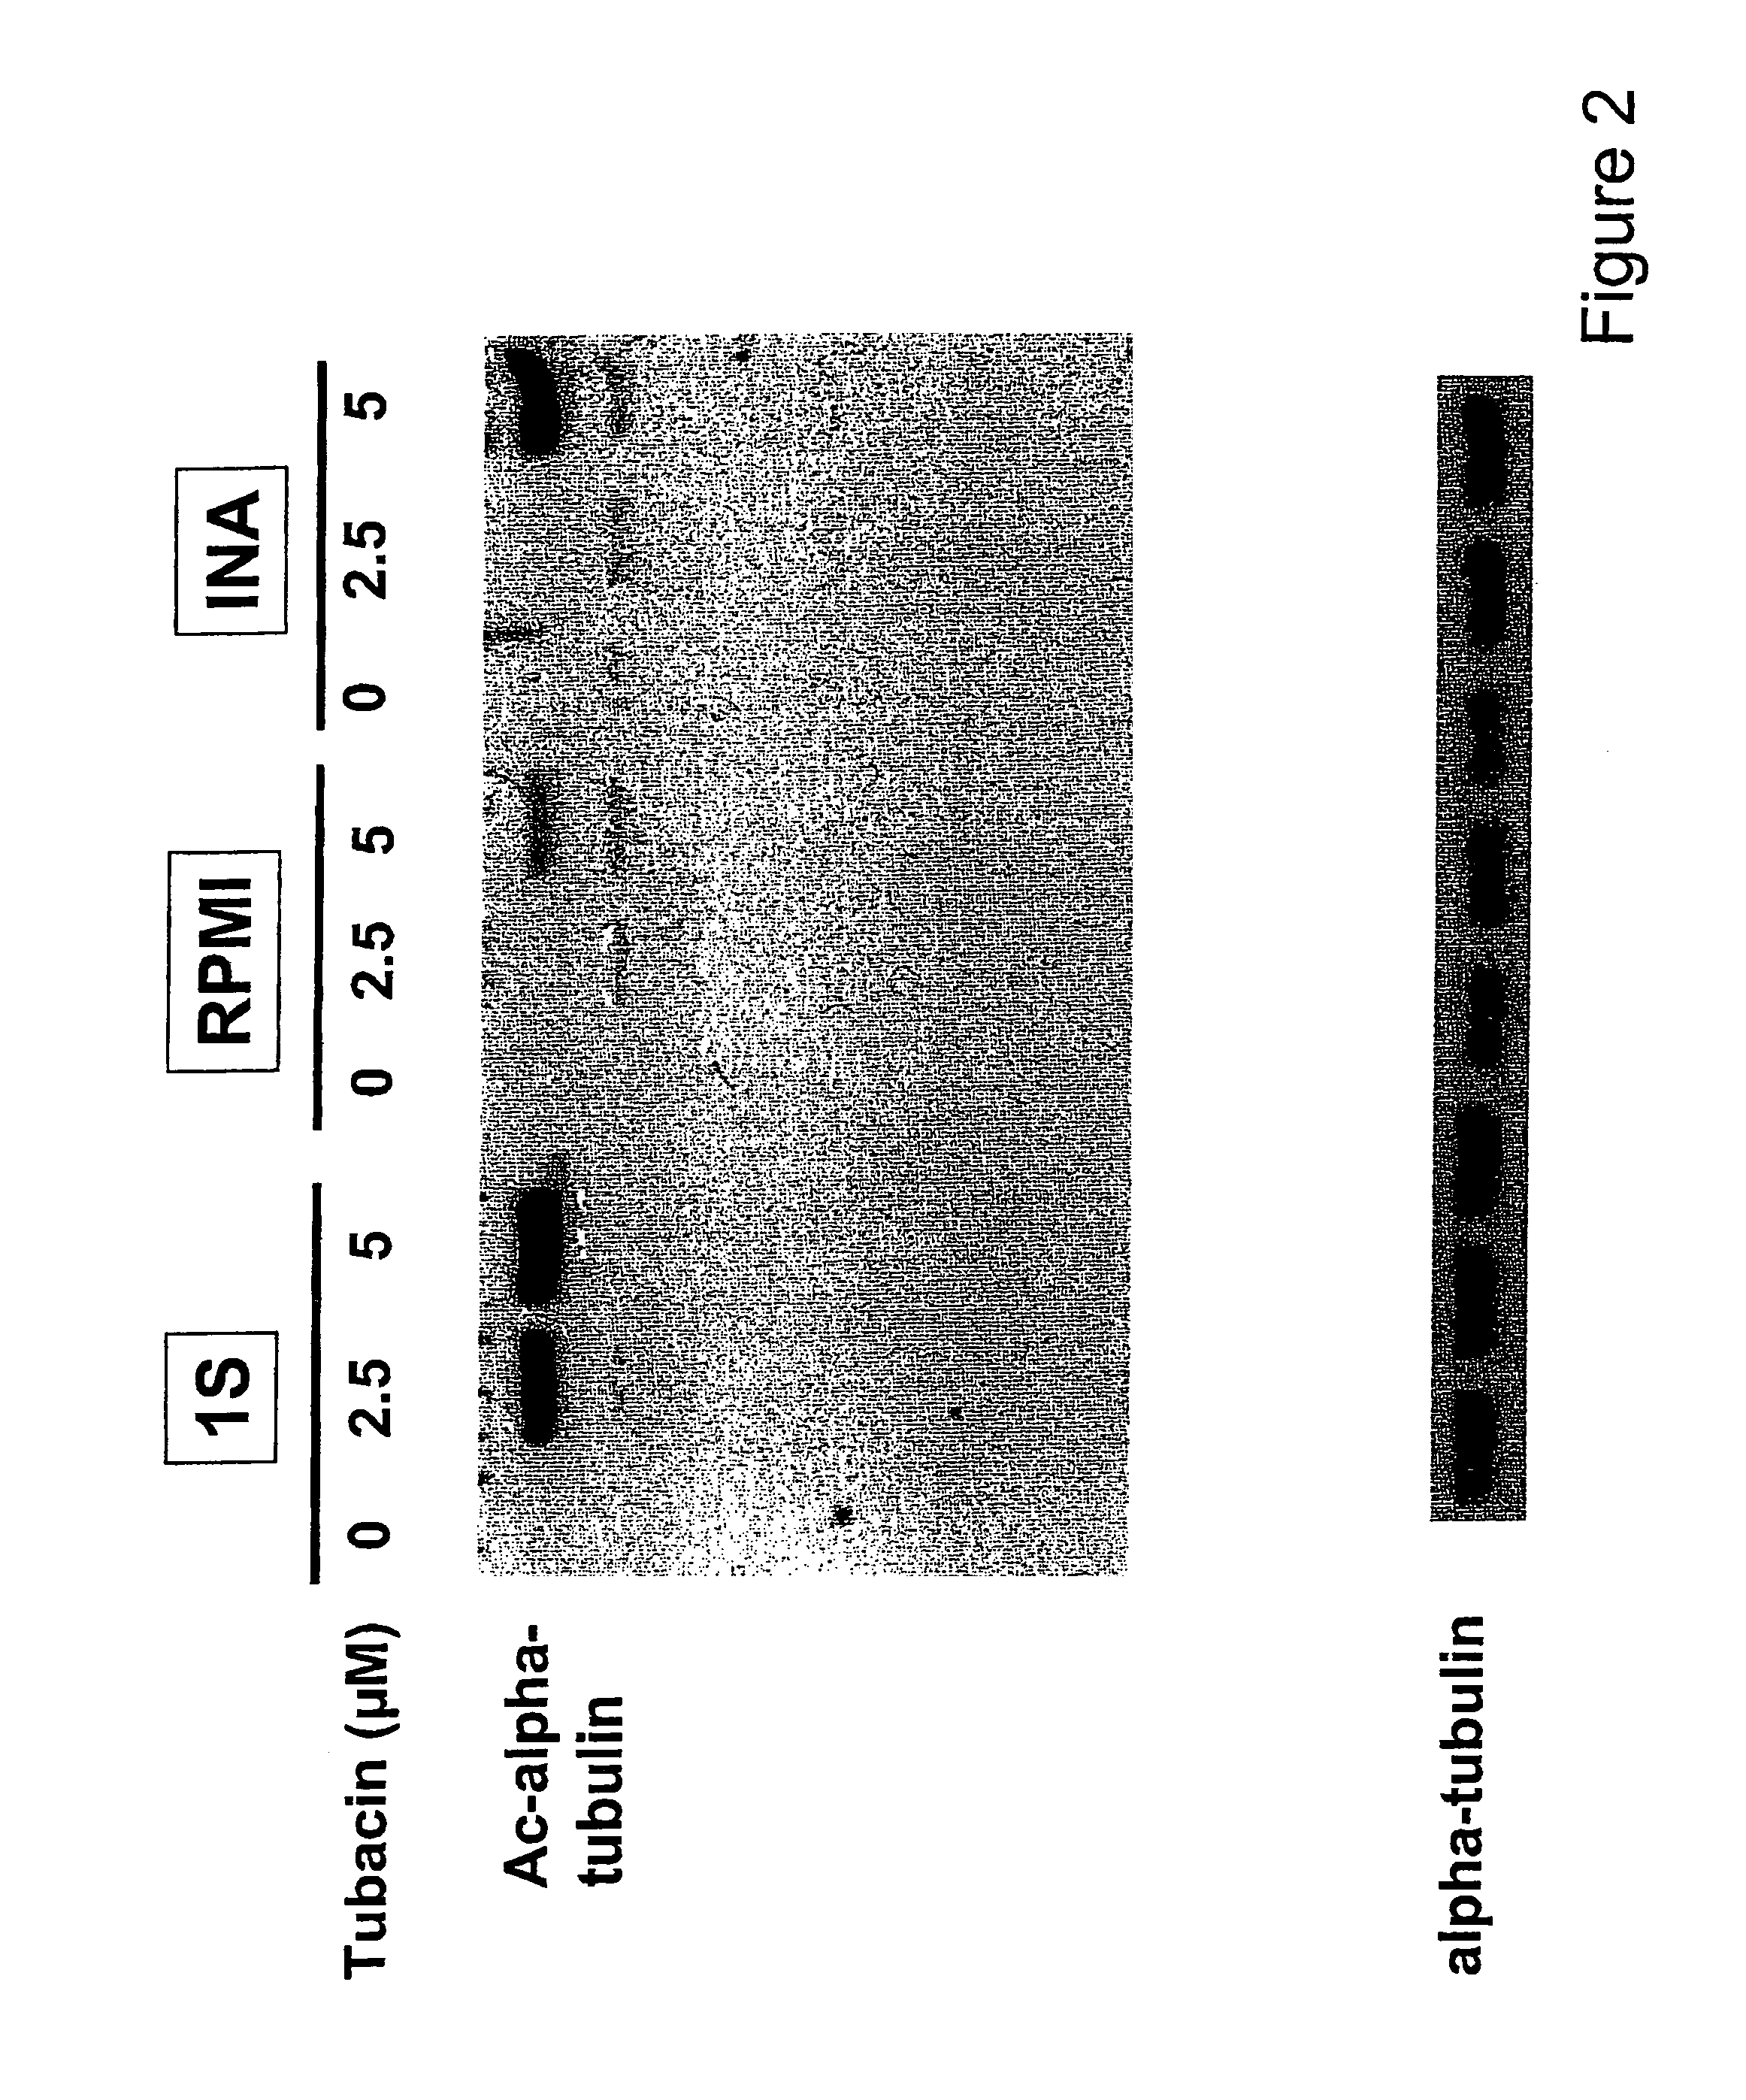 Treatment of protein degradation disorders